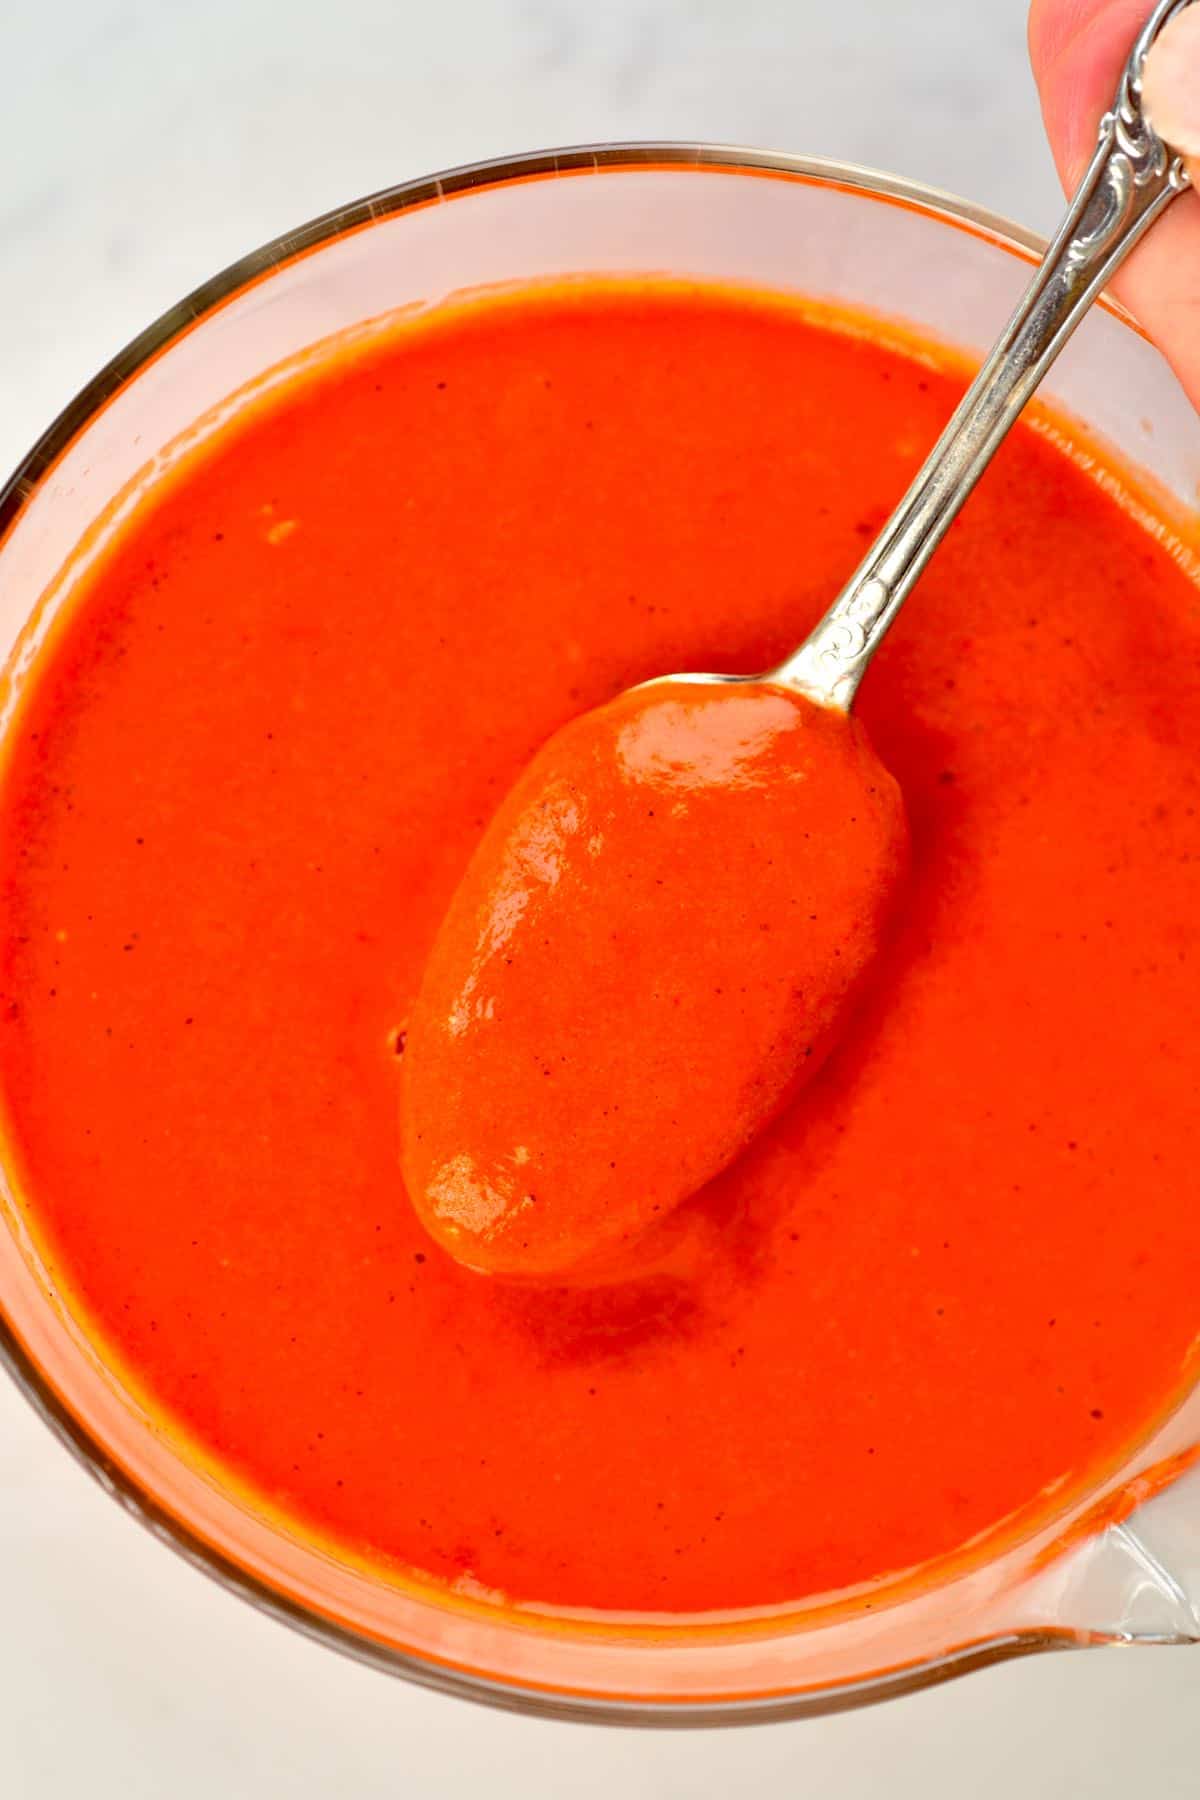 A spoonful of Roasted Red Pepper Sauce